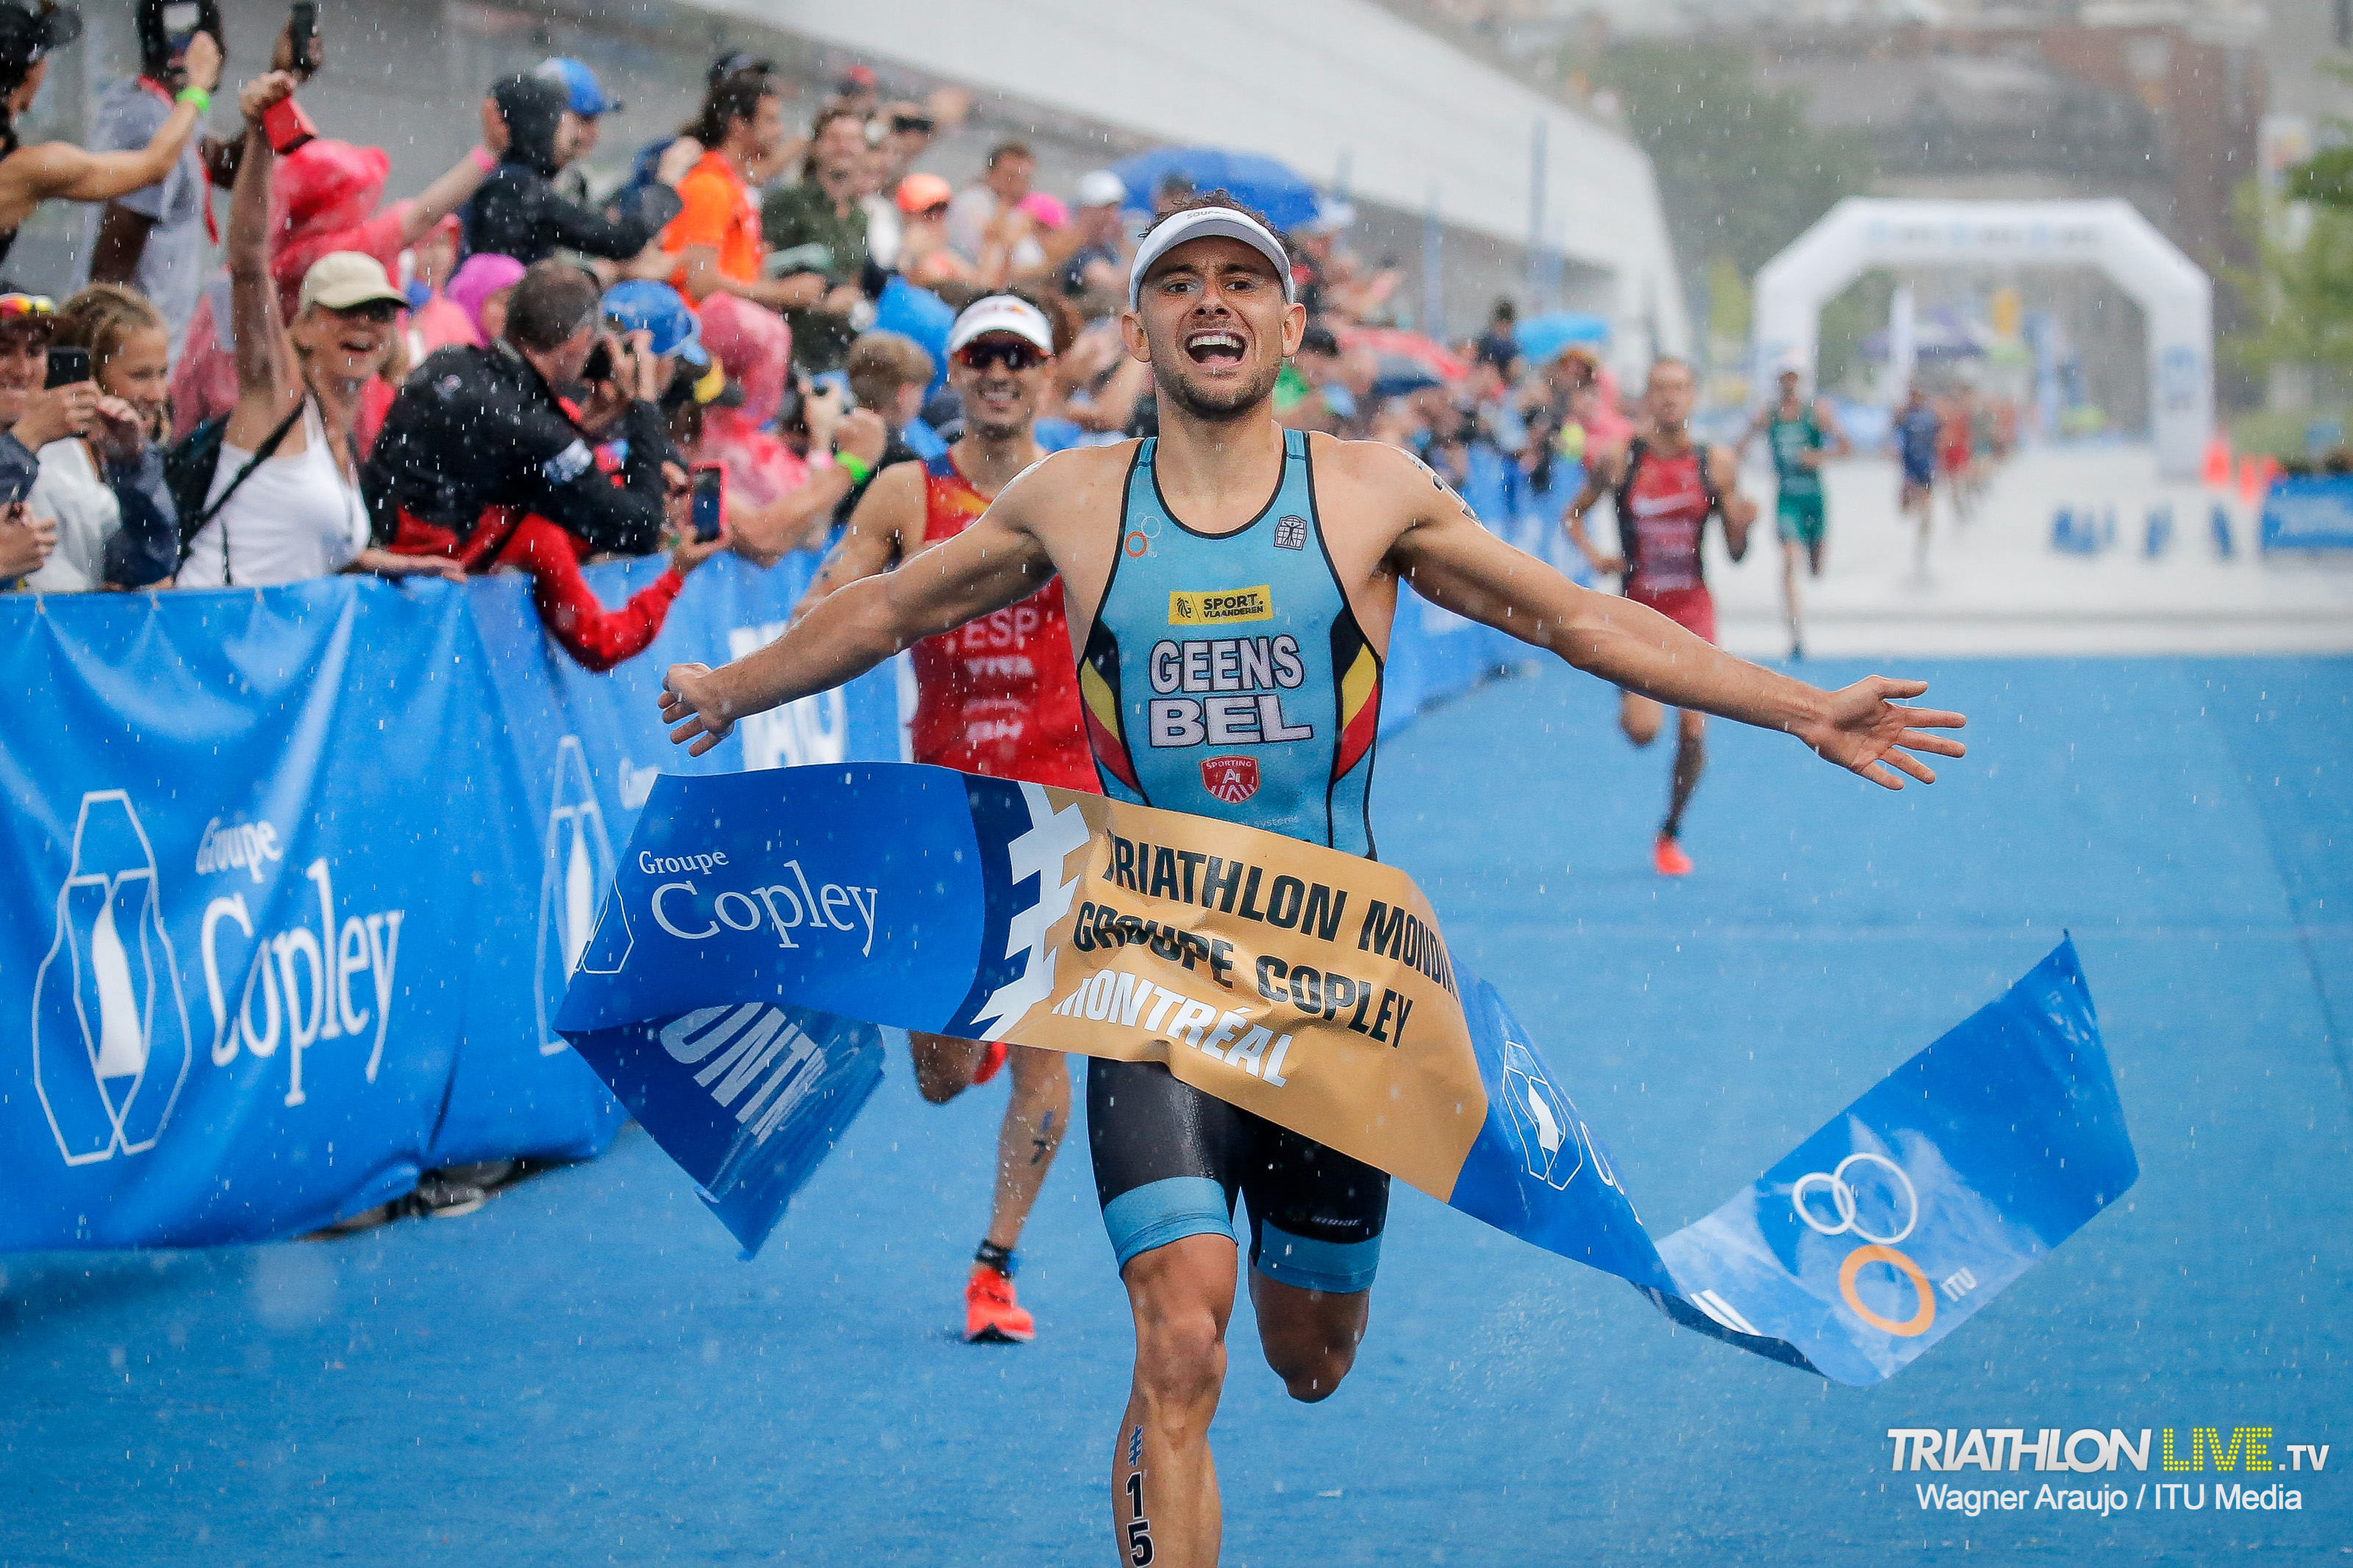 Jelle Geens shines under the rain to claim his first ever WTS victory in Montreal • World Triathlon